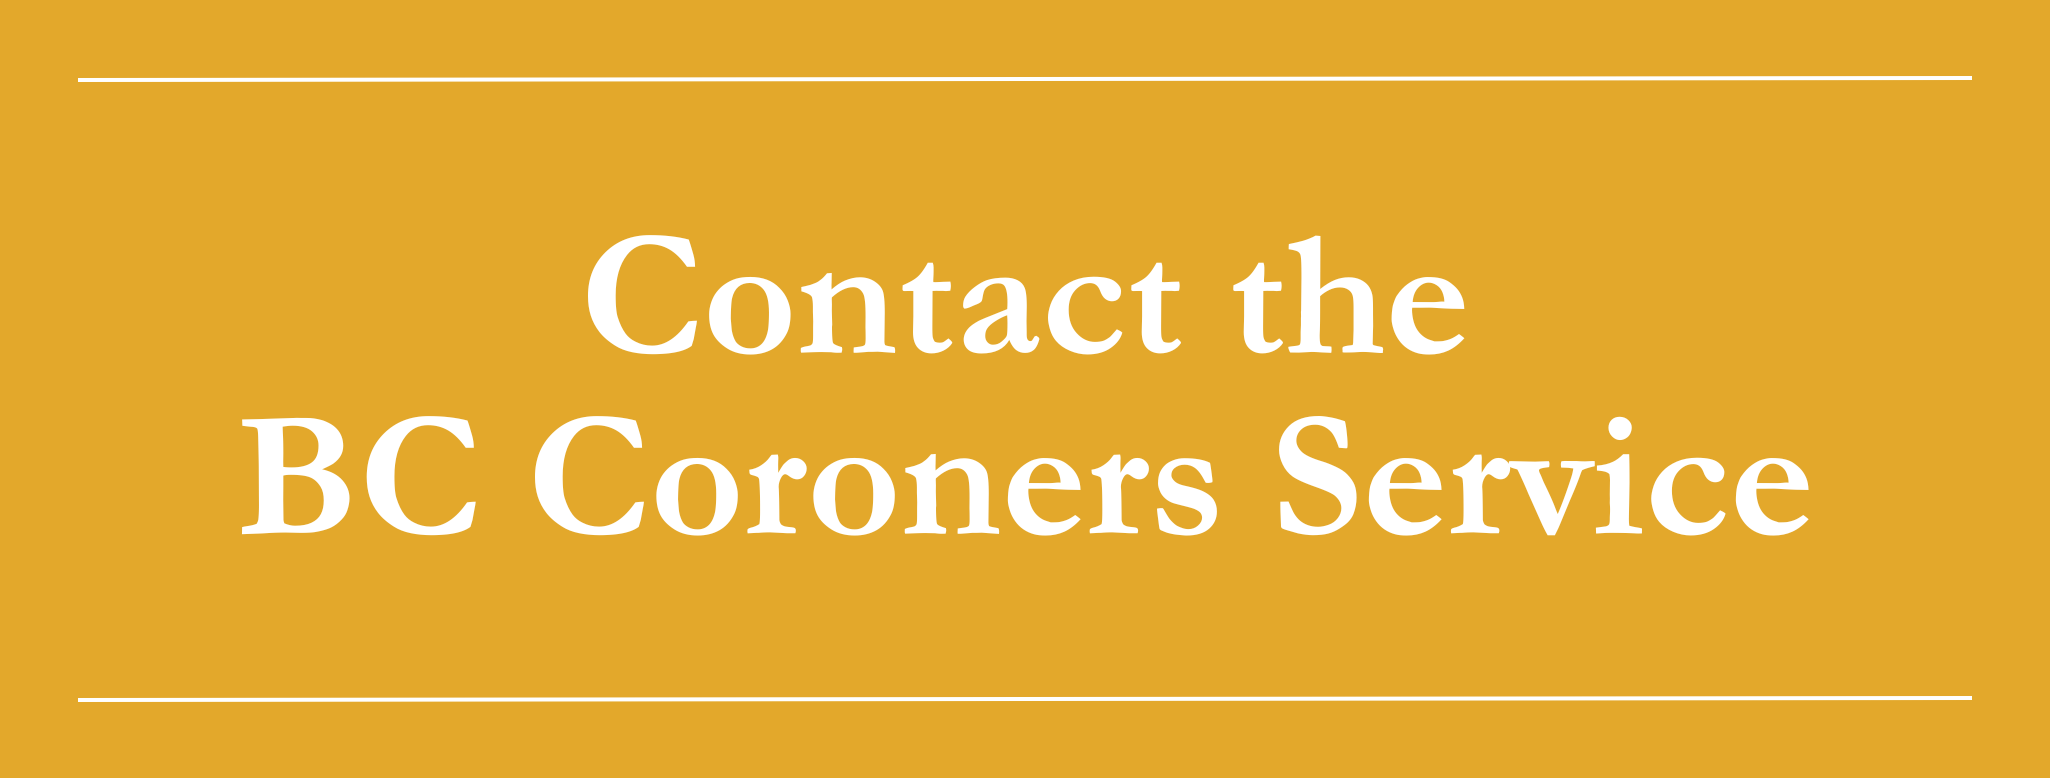 Click to Contact the BC Coroners Service